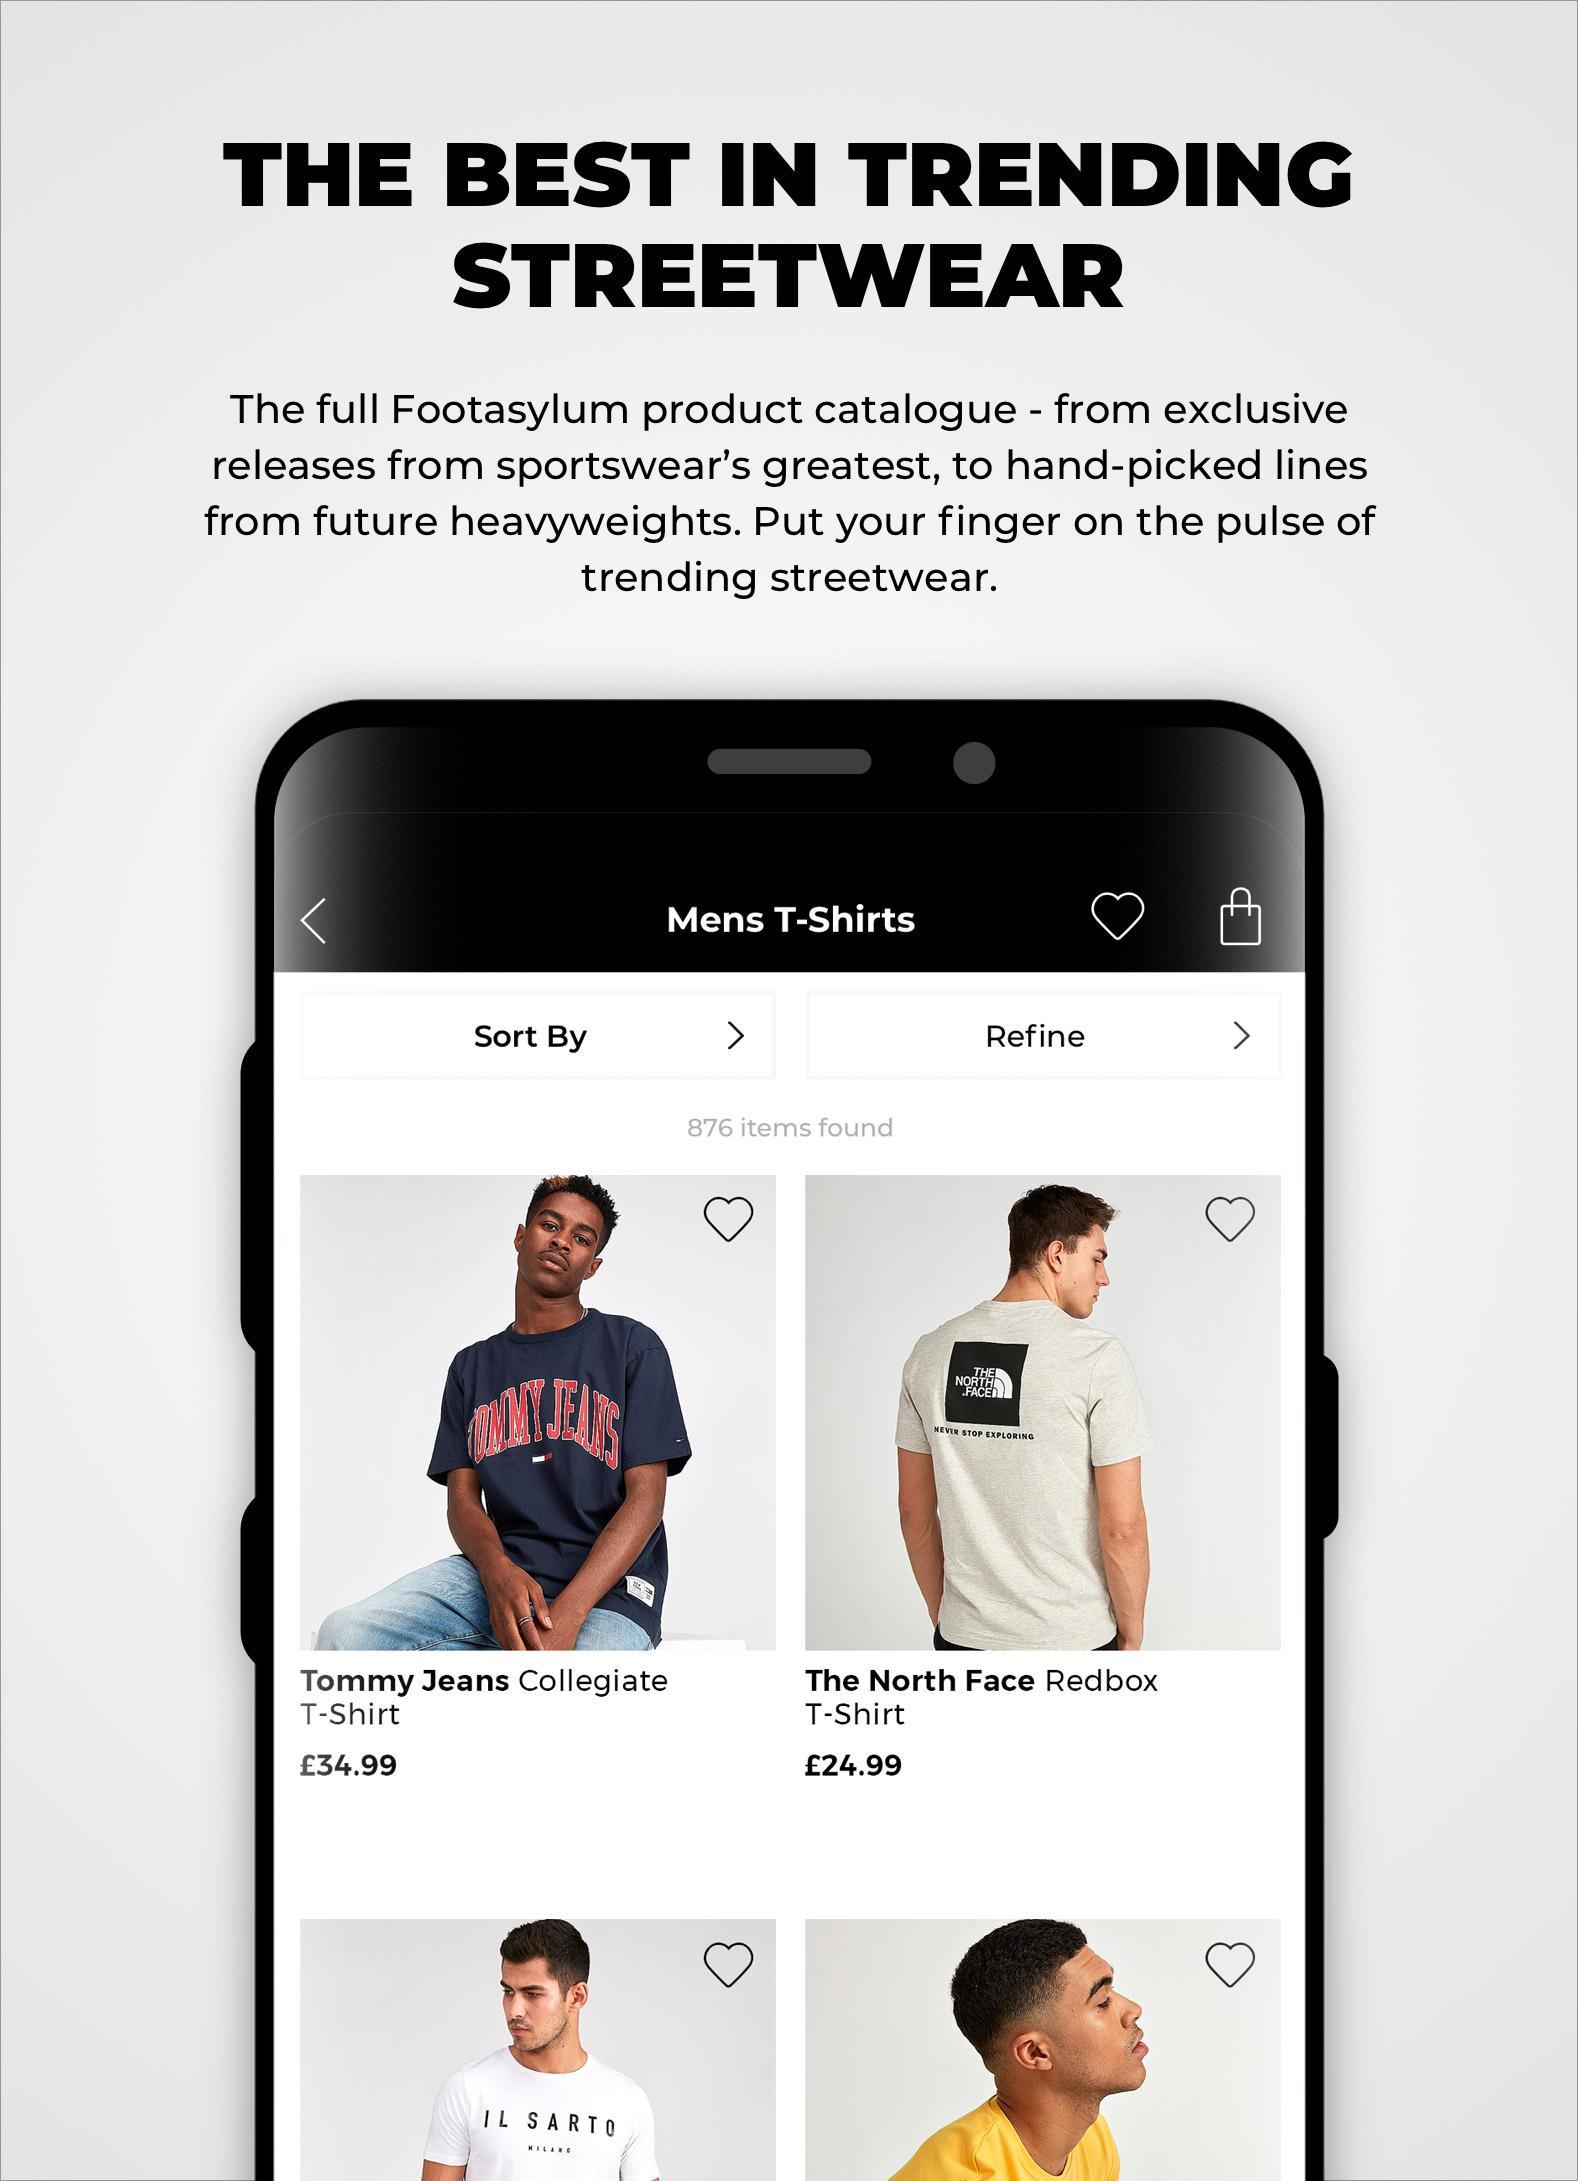 Footasylum for Android - APK Download